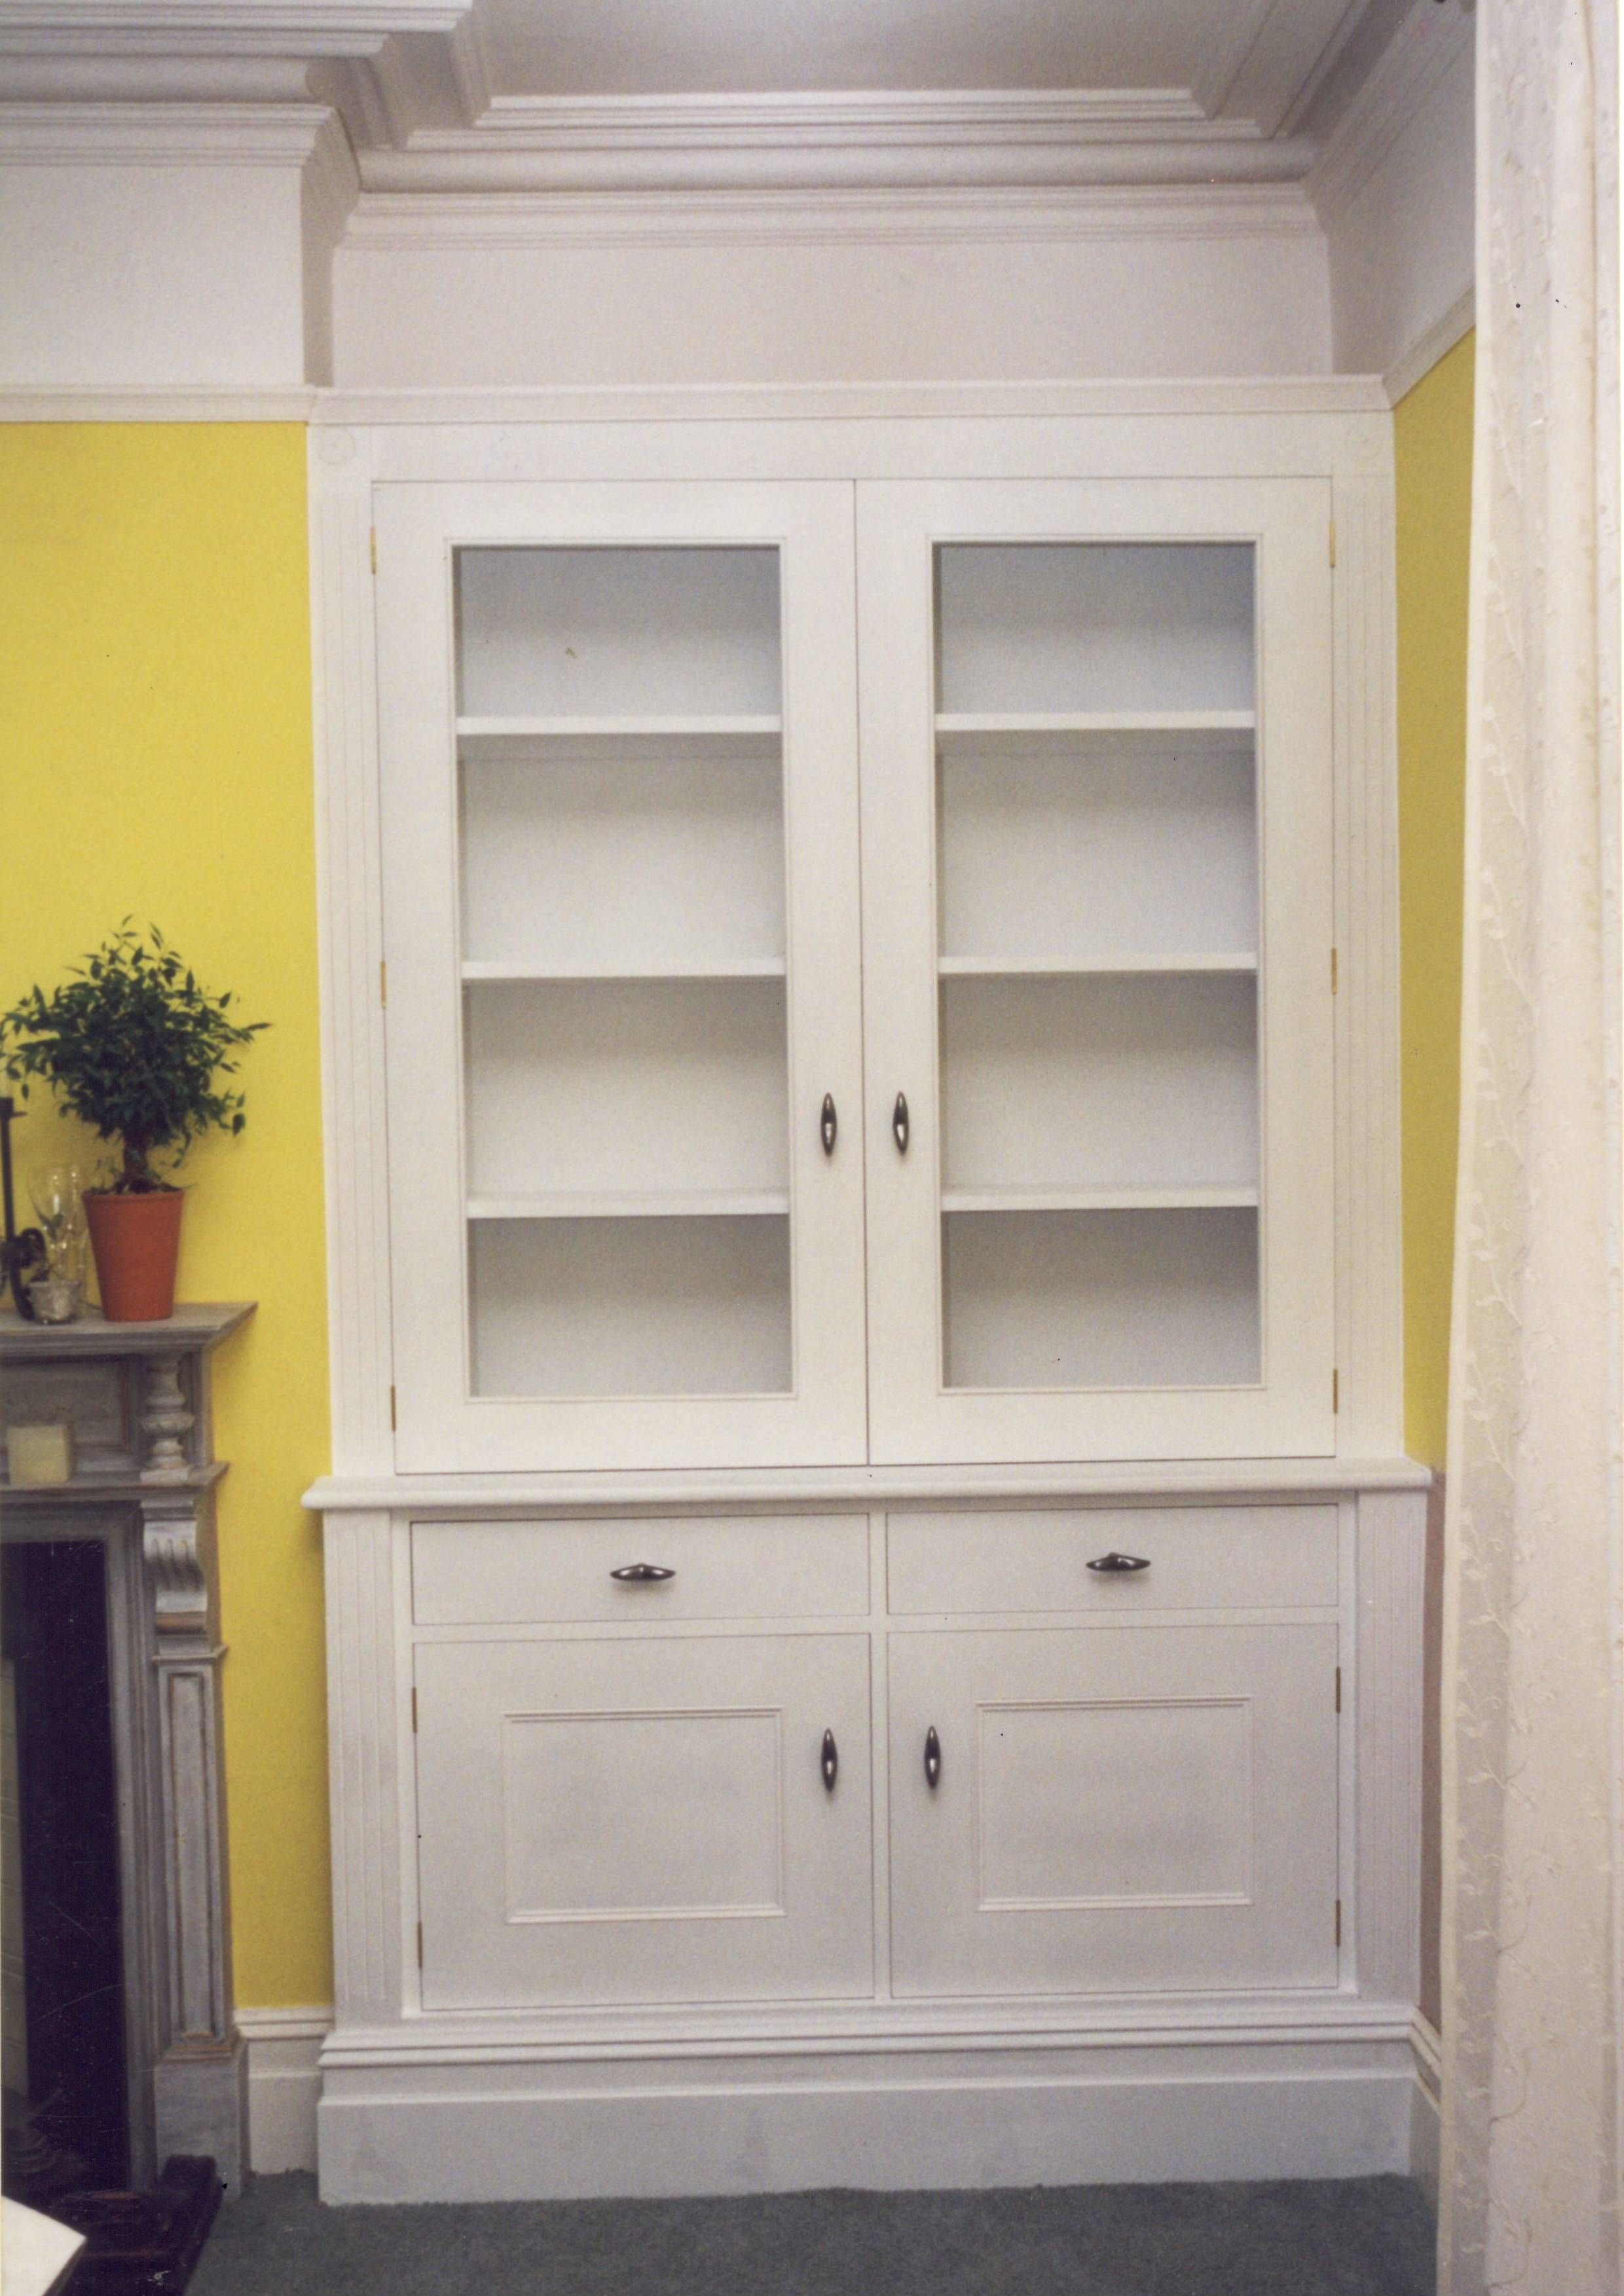 Handmade Built In Furniture Broughton Joinery Fitted Furniture Inside Handmade Cupboards (View 5 of 12)